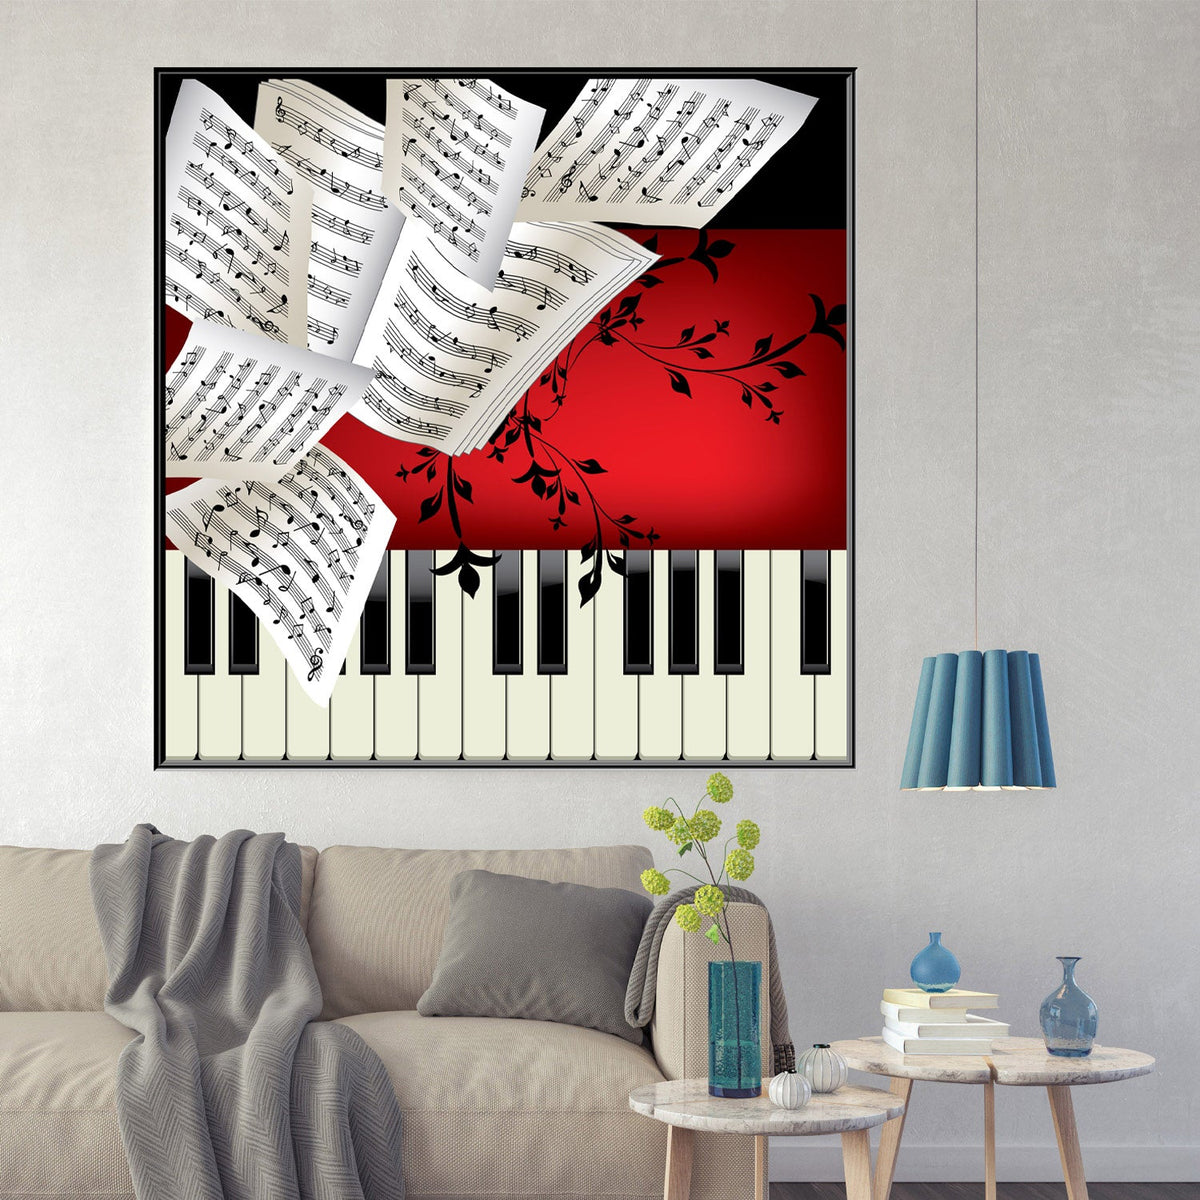 https://cdn.shopify.com/s/files/1/0387/9986/8044/products/MusicalNotesOnPianoCanvasArtprintFloatingFrame-2.jpg